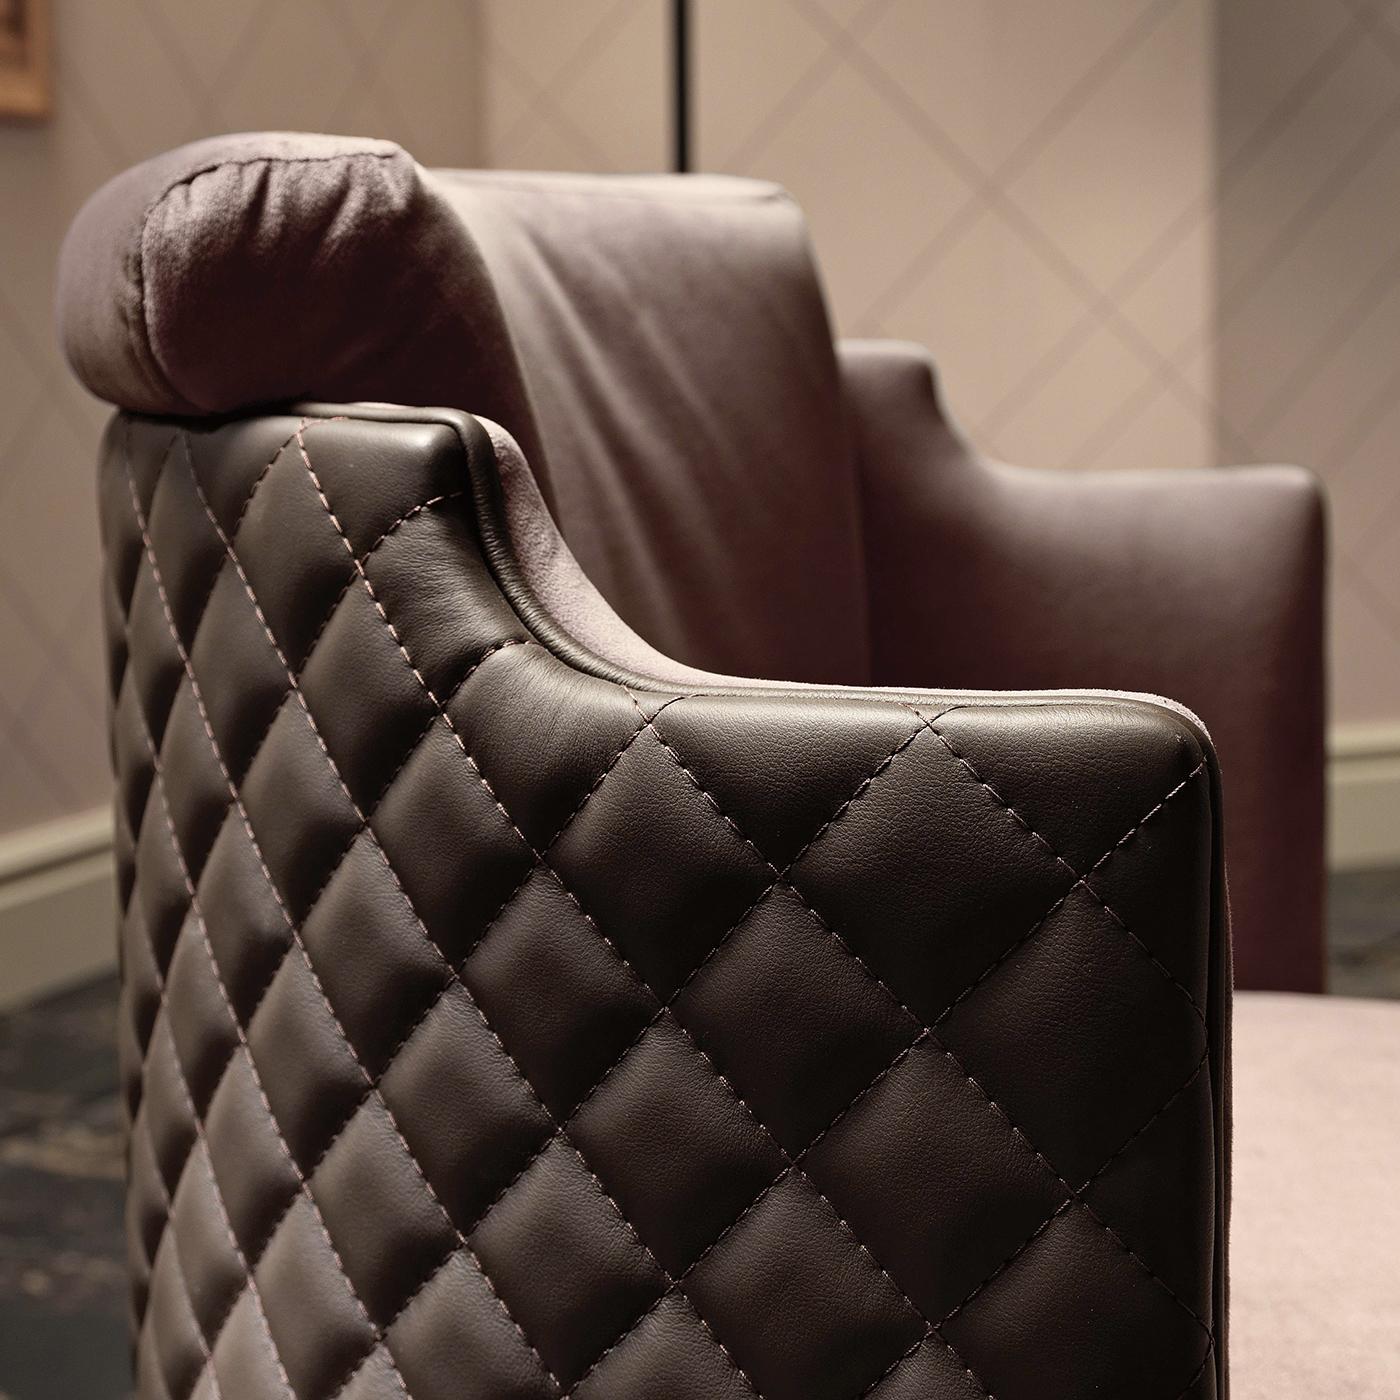 This plush armchair will be an exclusive addition to a spacious walk-in closet in the bedroom or a living room decor. This design by Marzia and Leo Dainelli is handcrafted of solid wood with a plinth swivel base with a 360-degree range of motion.